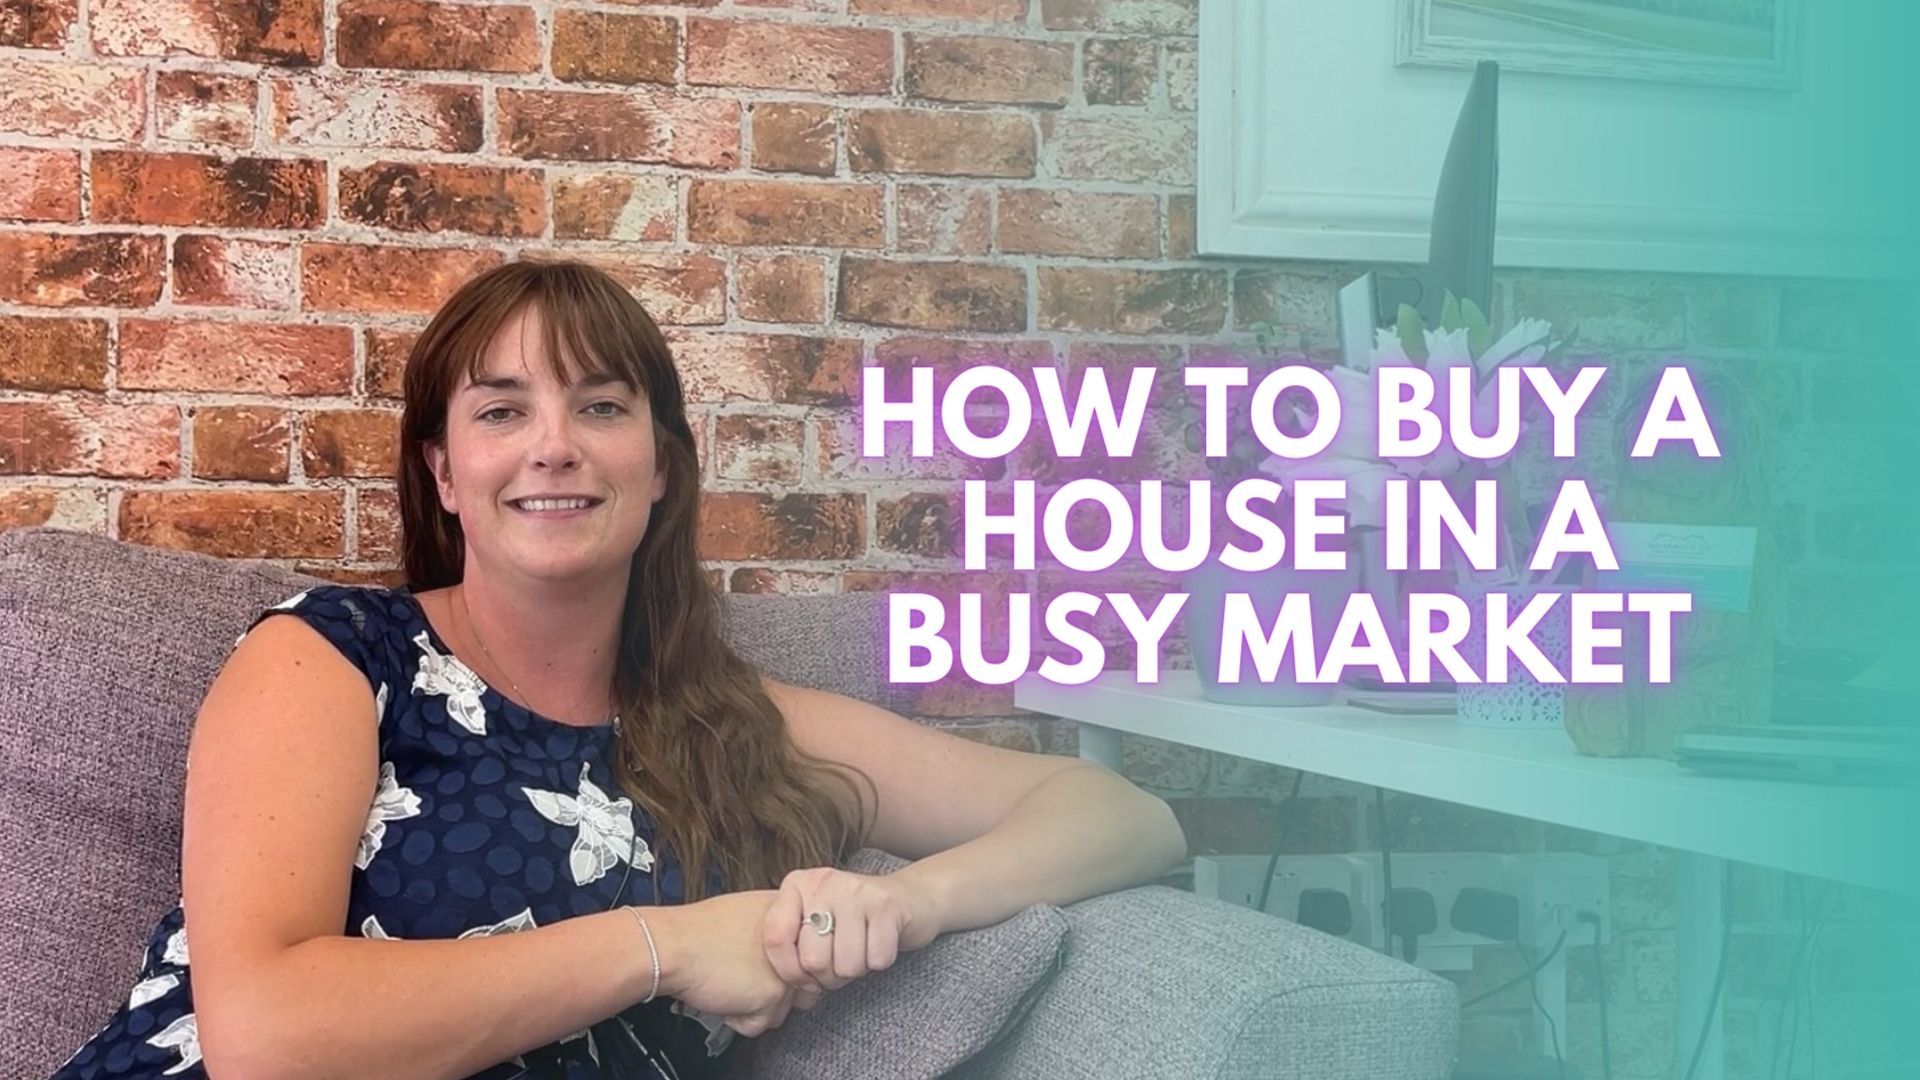 VIDEO: How To Buy A House In A Busy Market